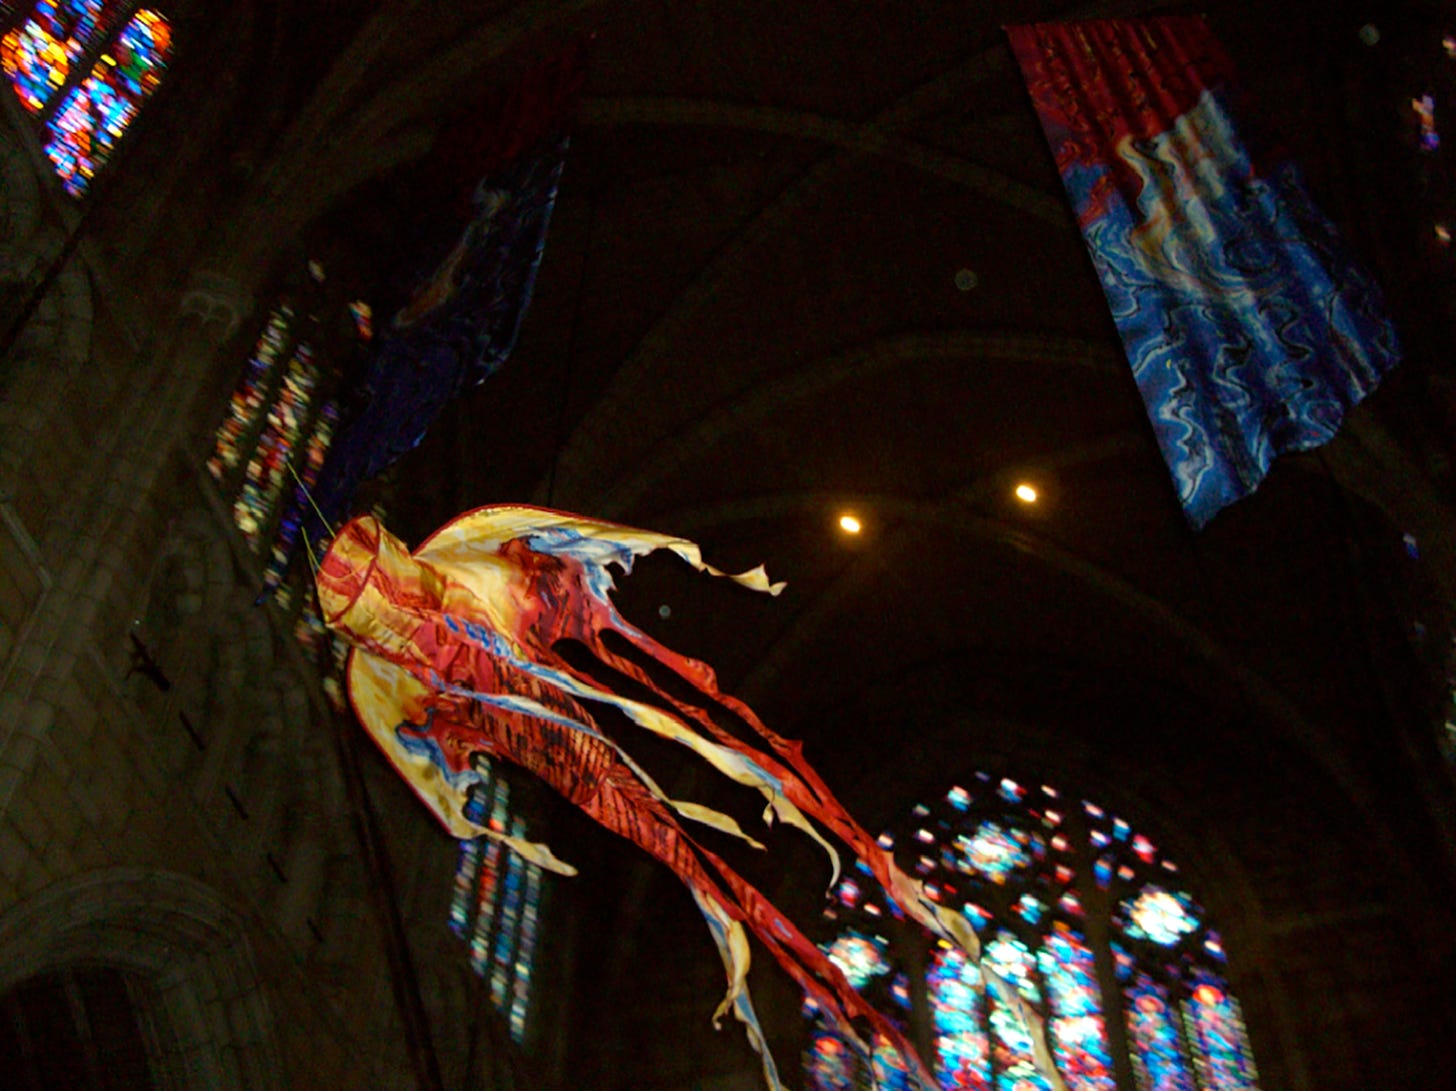 a colorful liturgical kite flies through the air inside a dim church with stained glass in the background